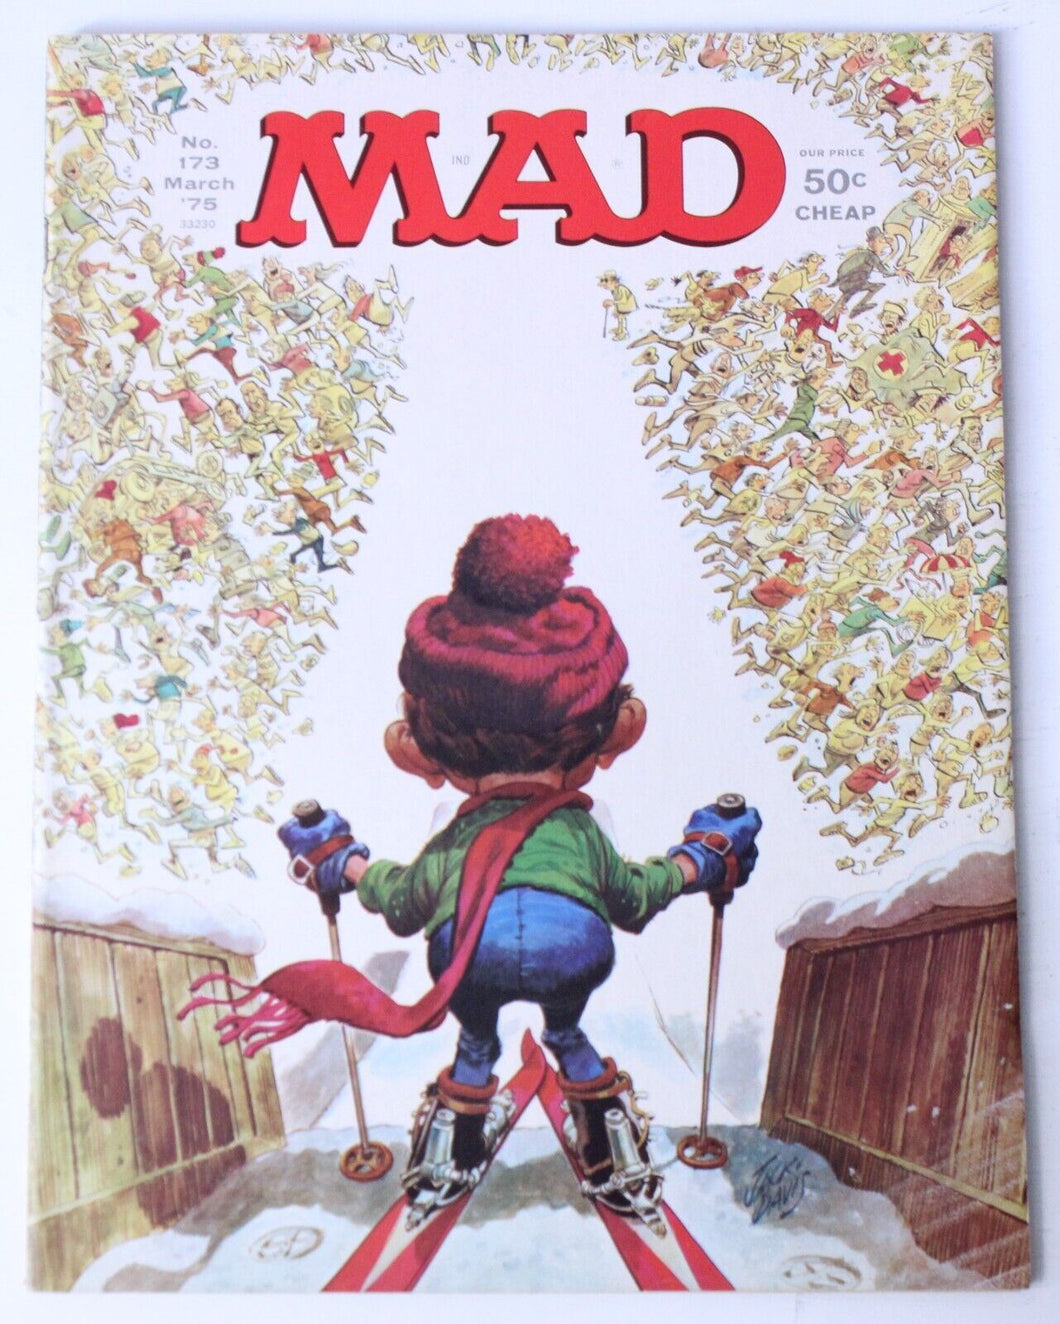 Mad (March 1975) #173